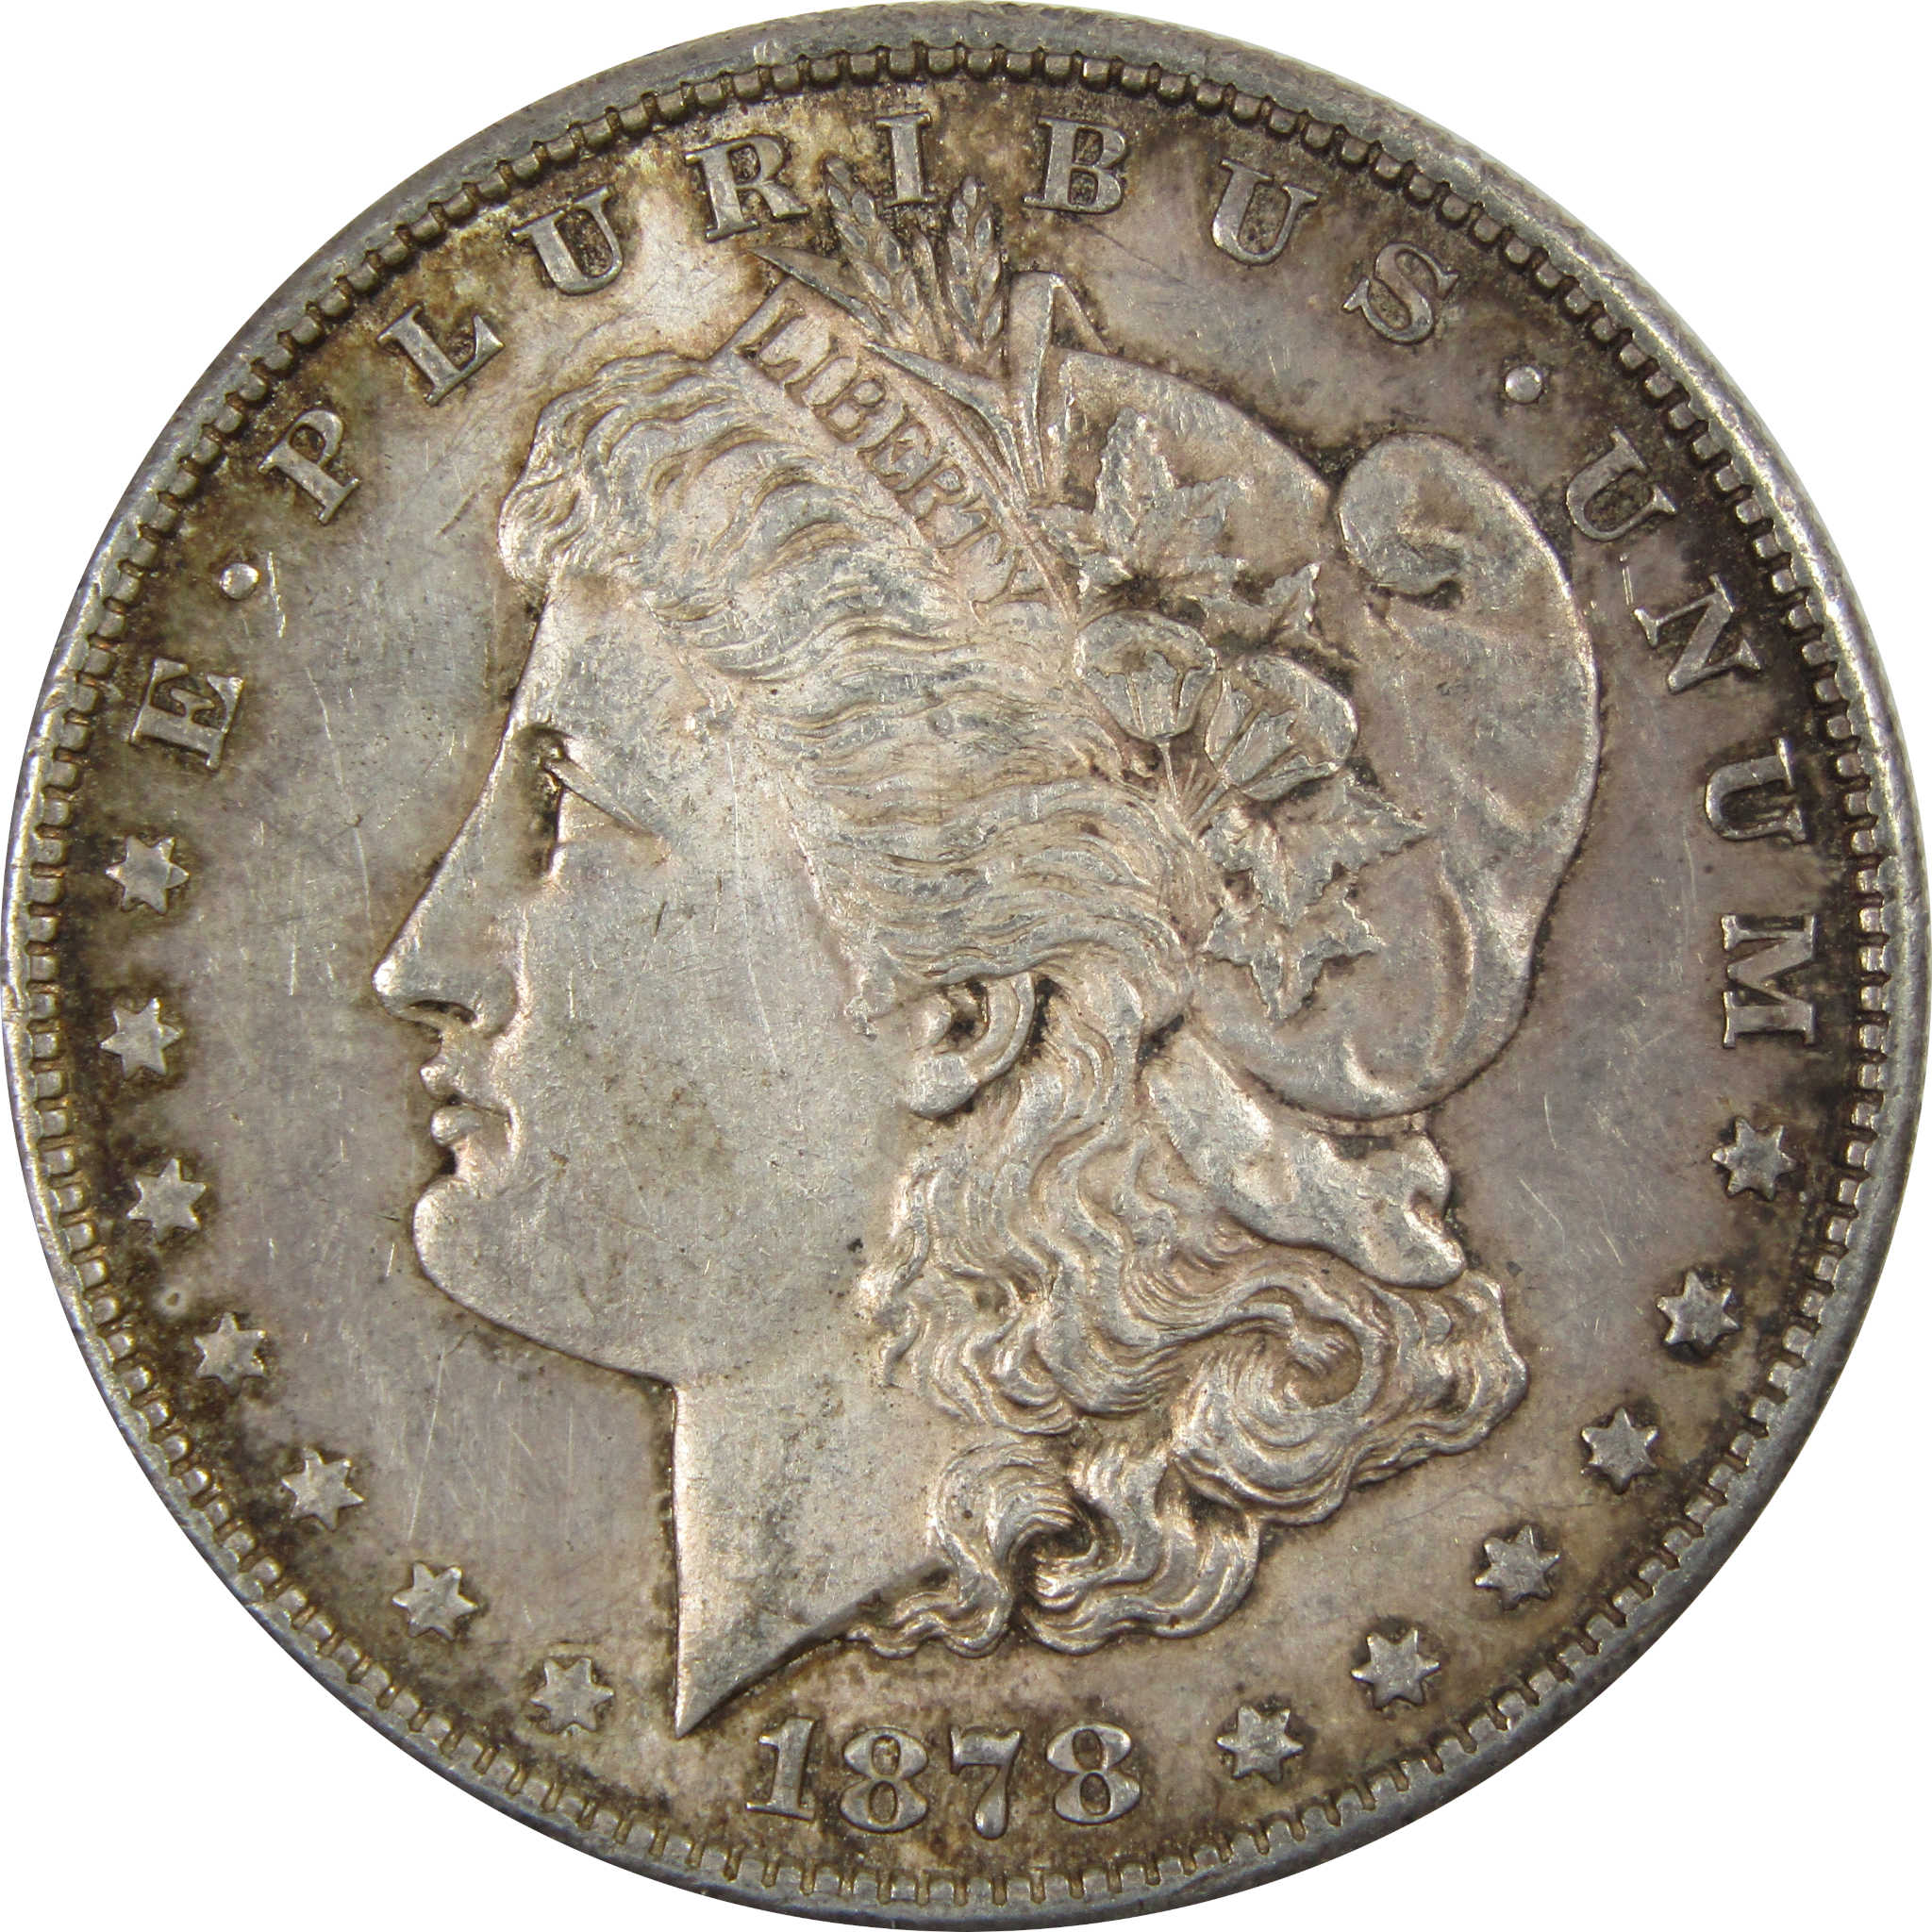 1878 S Morgan Dollar XF EF Extremely Fine 90% Silver $1 Coin SKU:I7012 - Morgan coin - Morgan silver dollar - Morgan silver dollar for sale - Profile Coins &amp; Collectibles